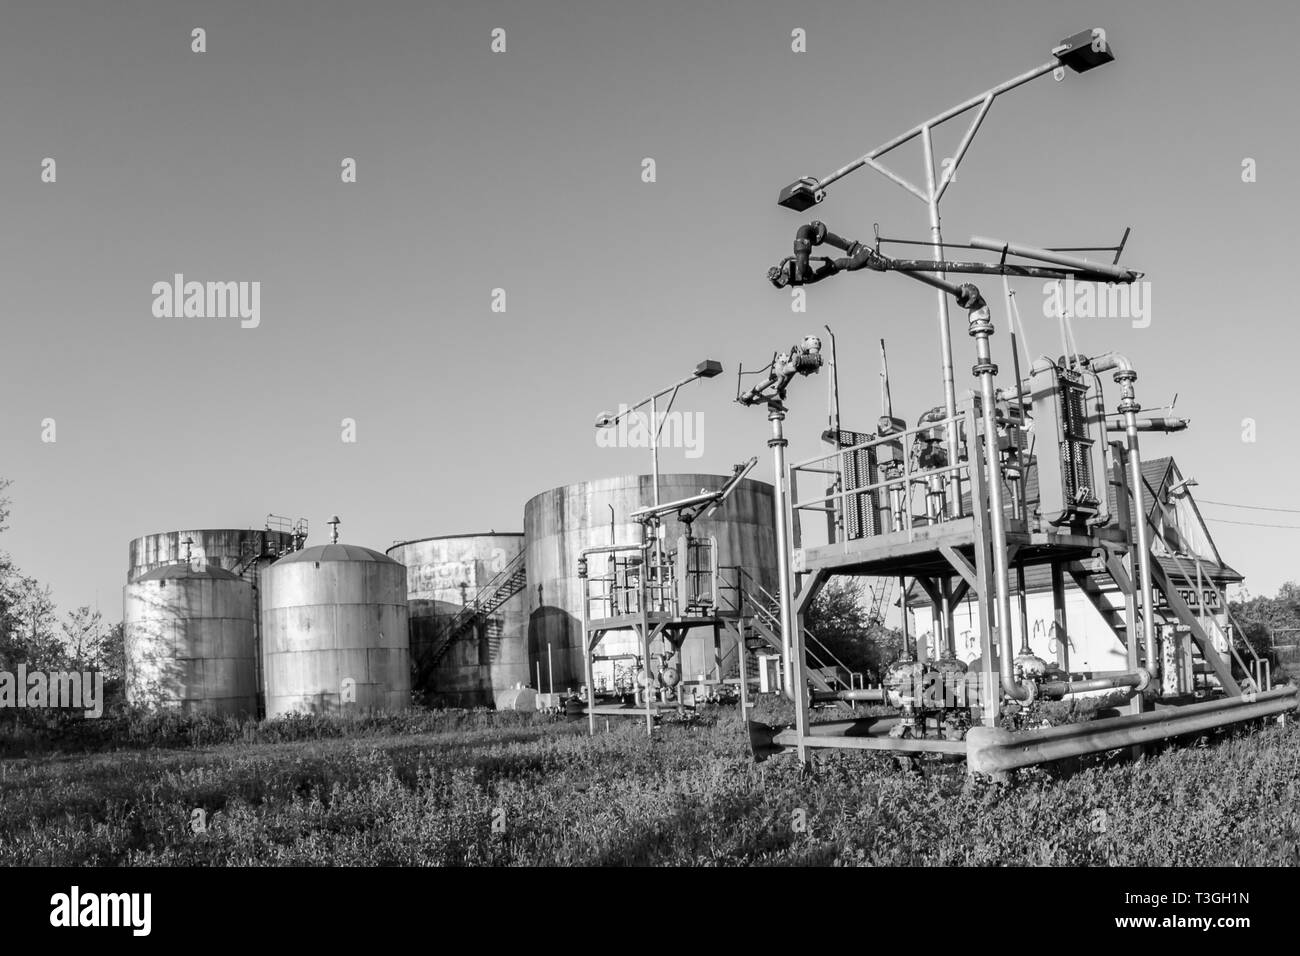 Monochrome picture of Vintage gas refinery showing oil reservoirs Stock Photo